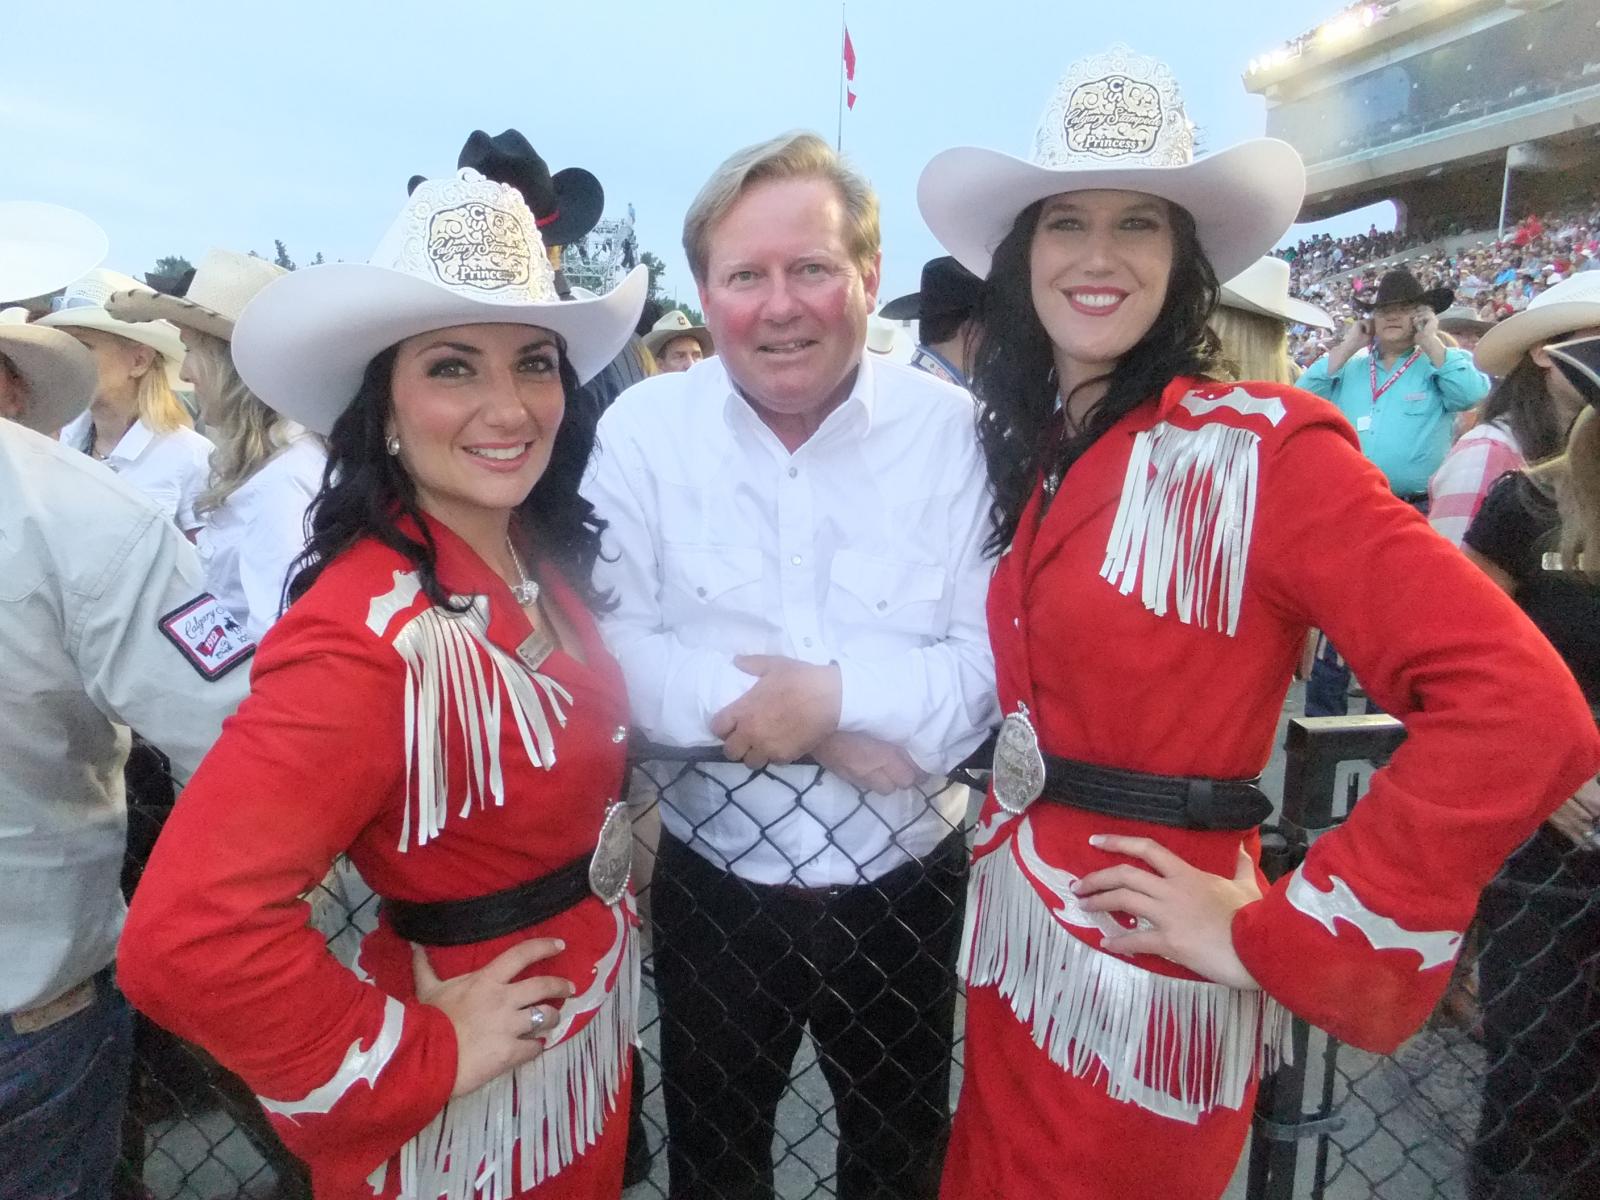 Kerry Moynihan at a country festival next to two young females 